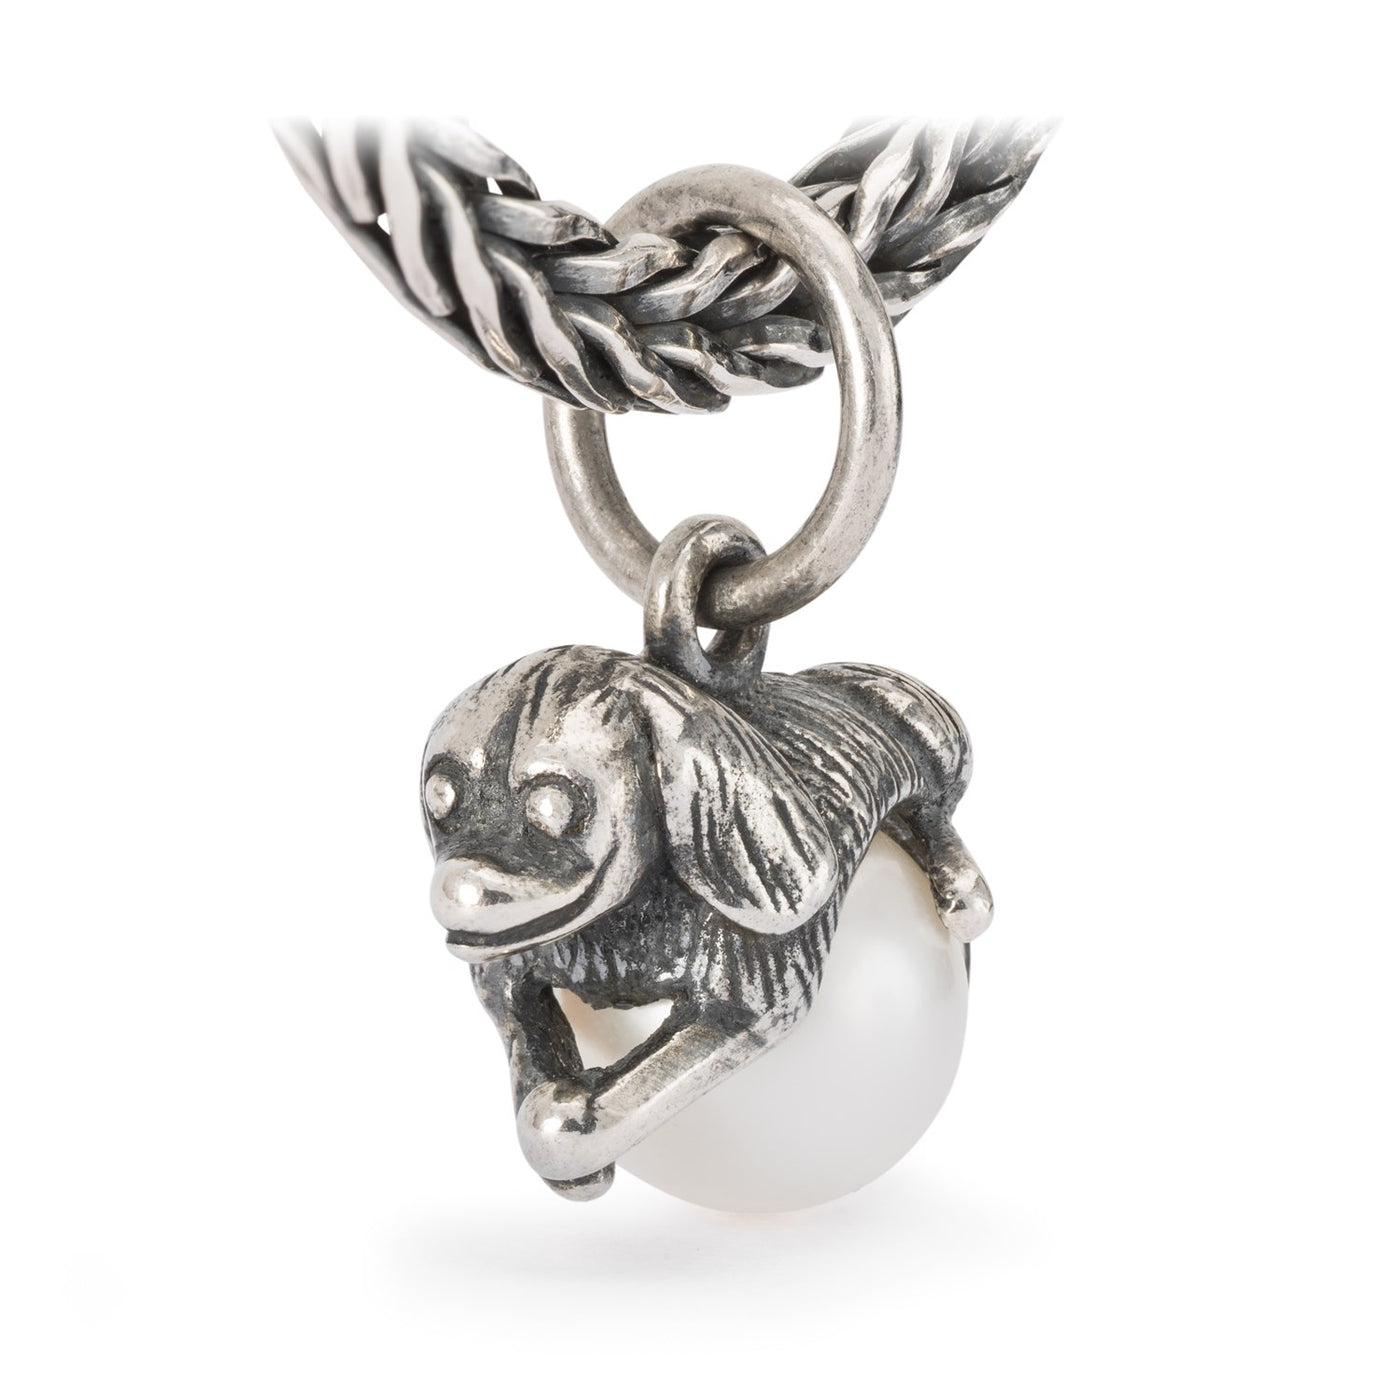 Jewellery silver pendant of a dog laying on a white pearl.